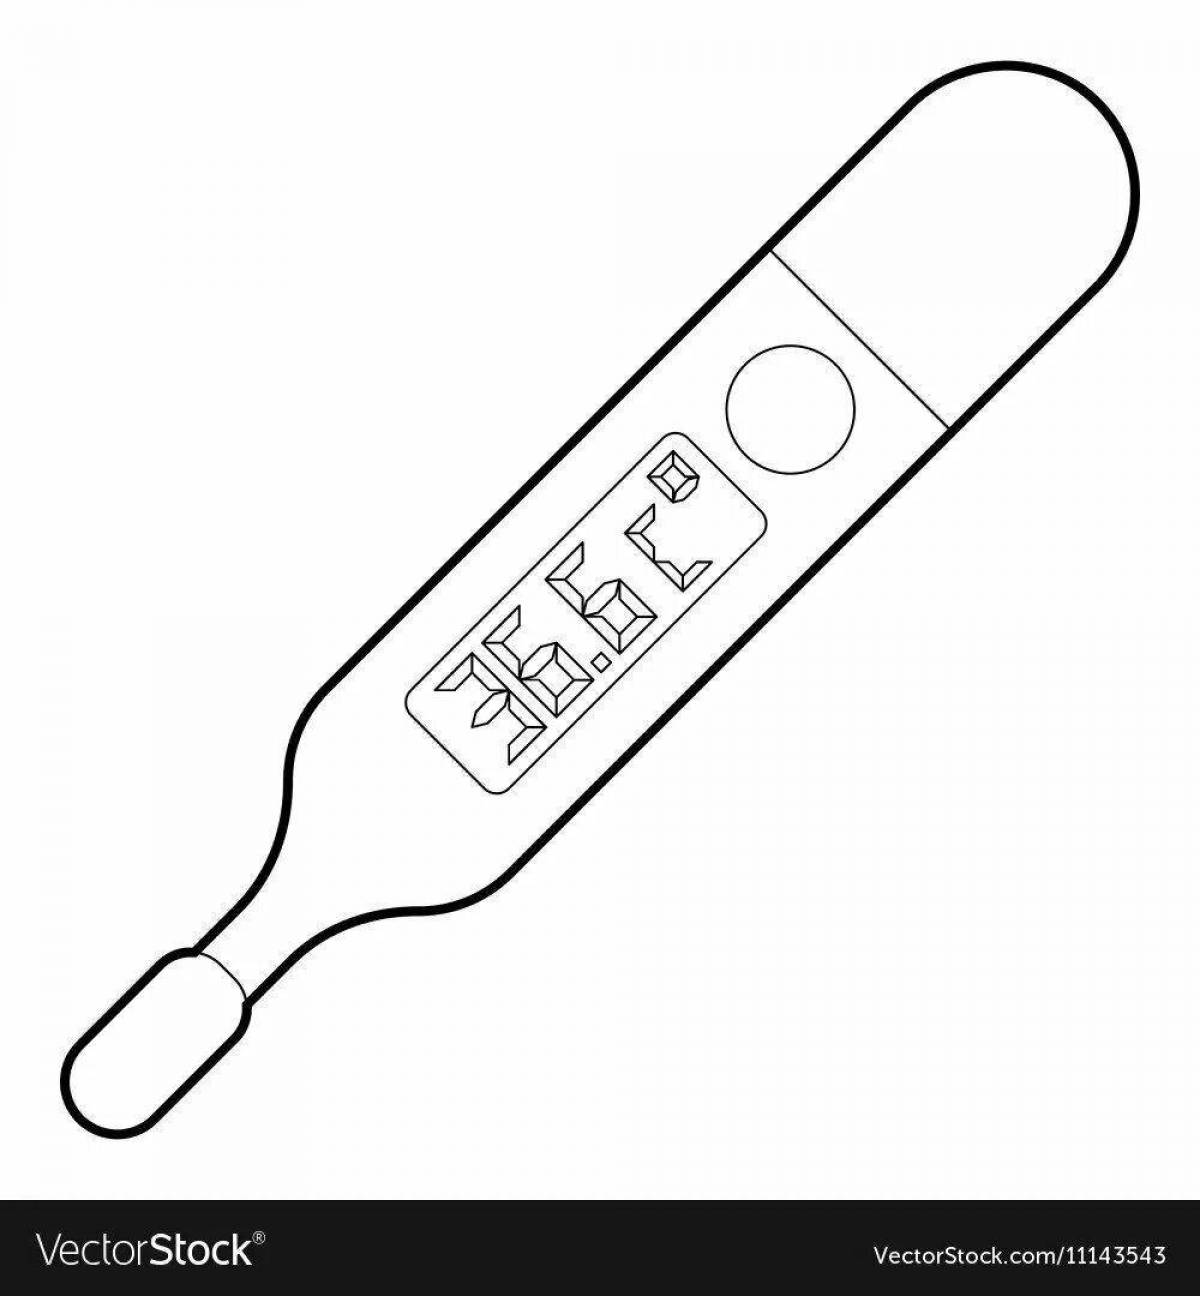 Children's thermometer coloring book